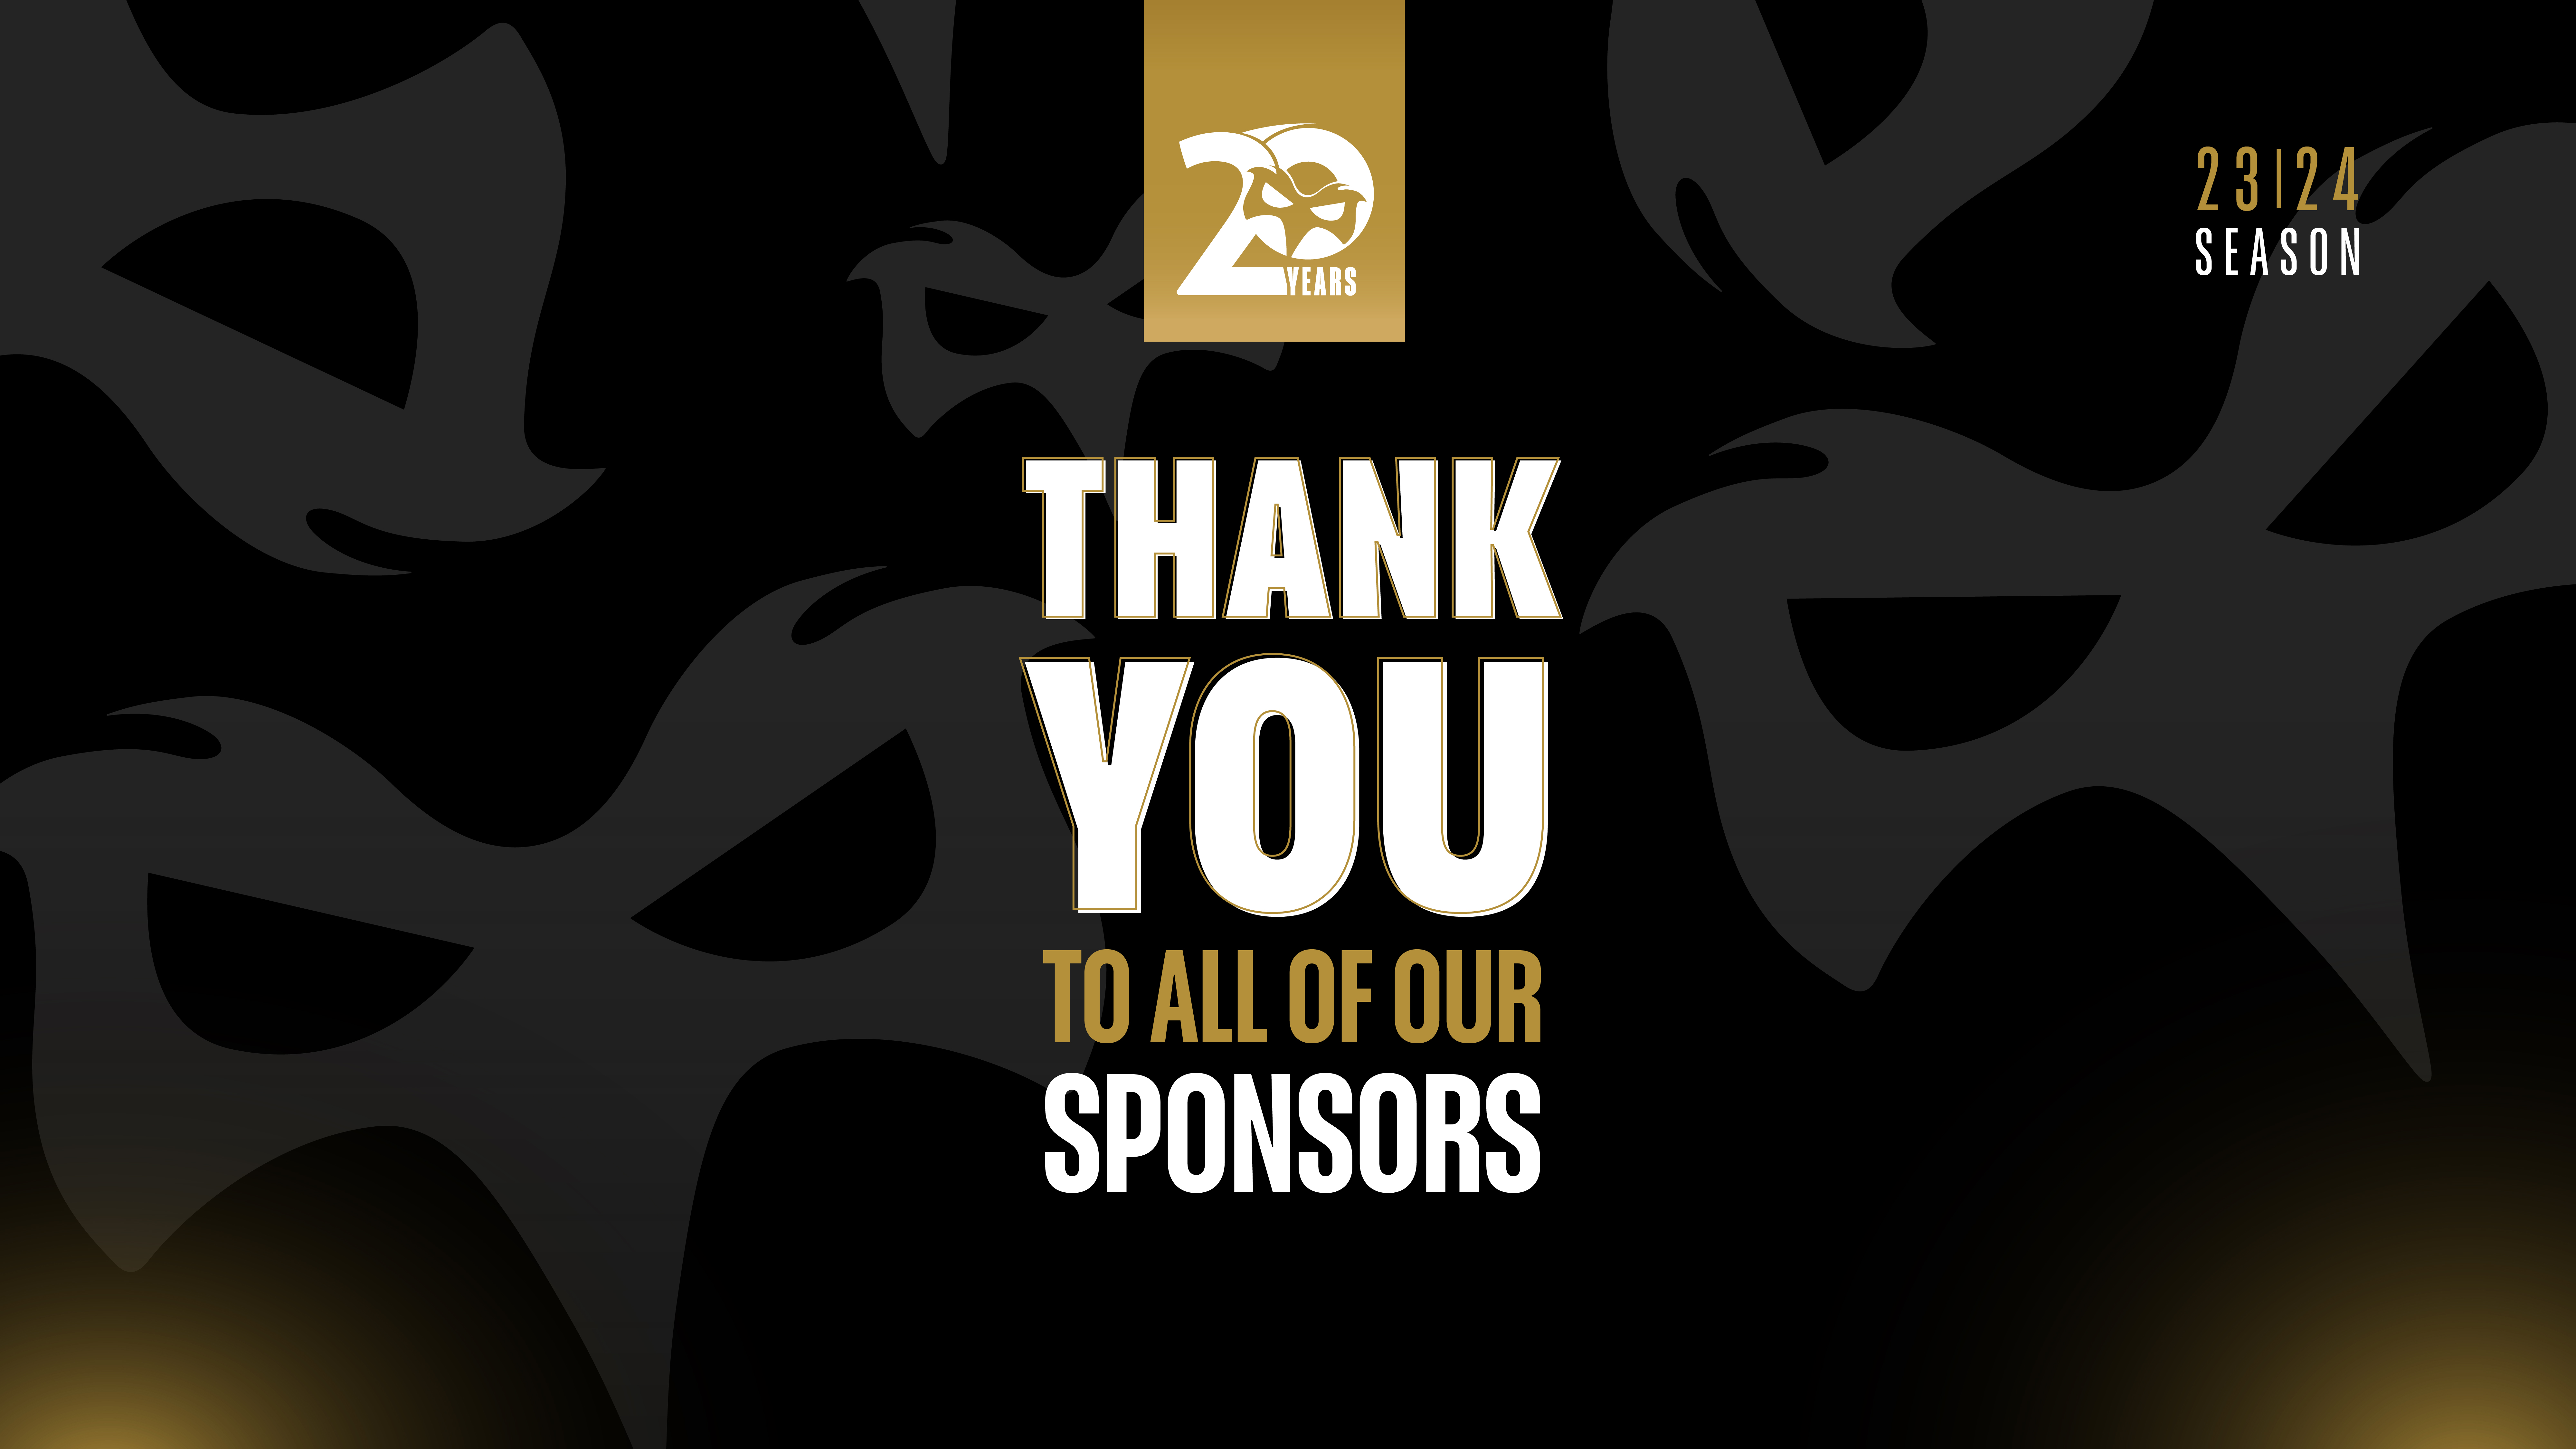 Thank you to our 23/24 sponsors